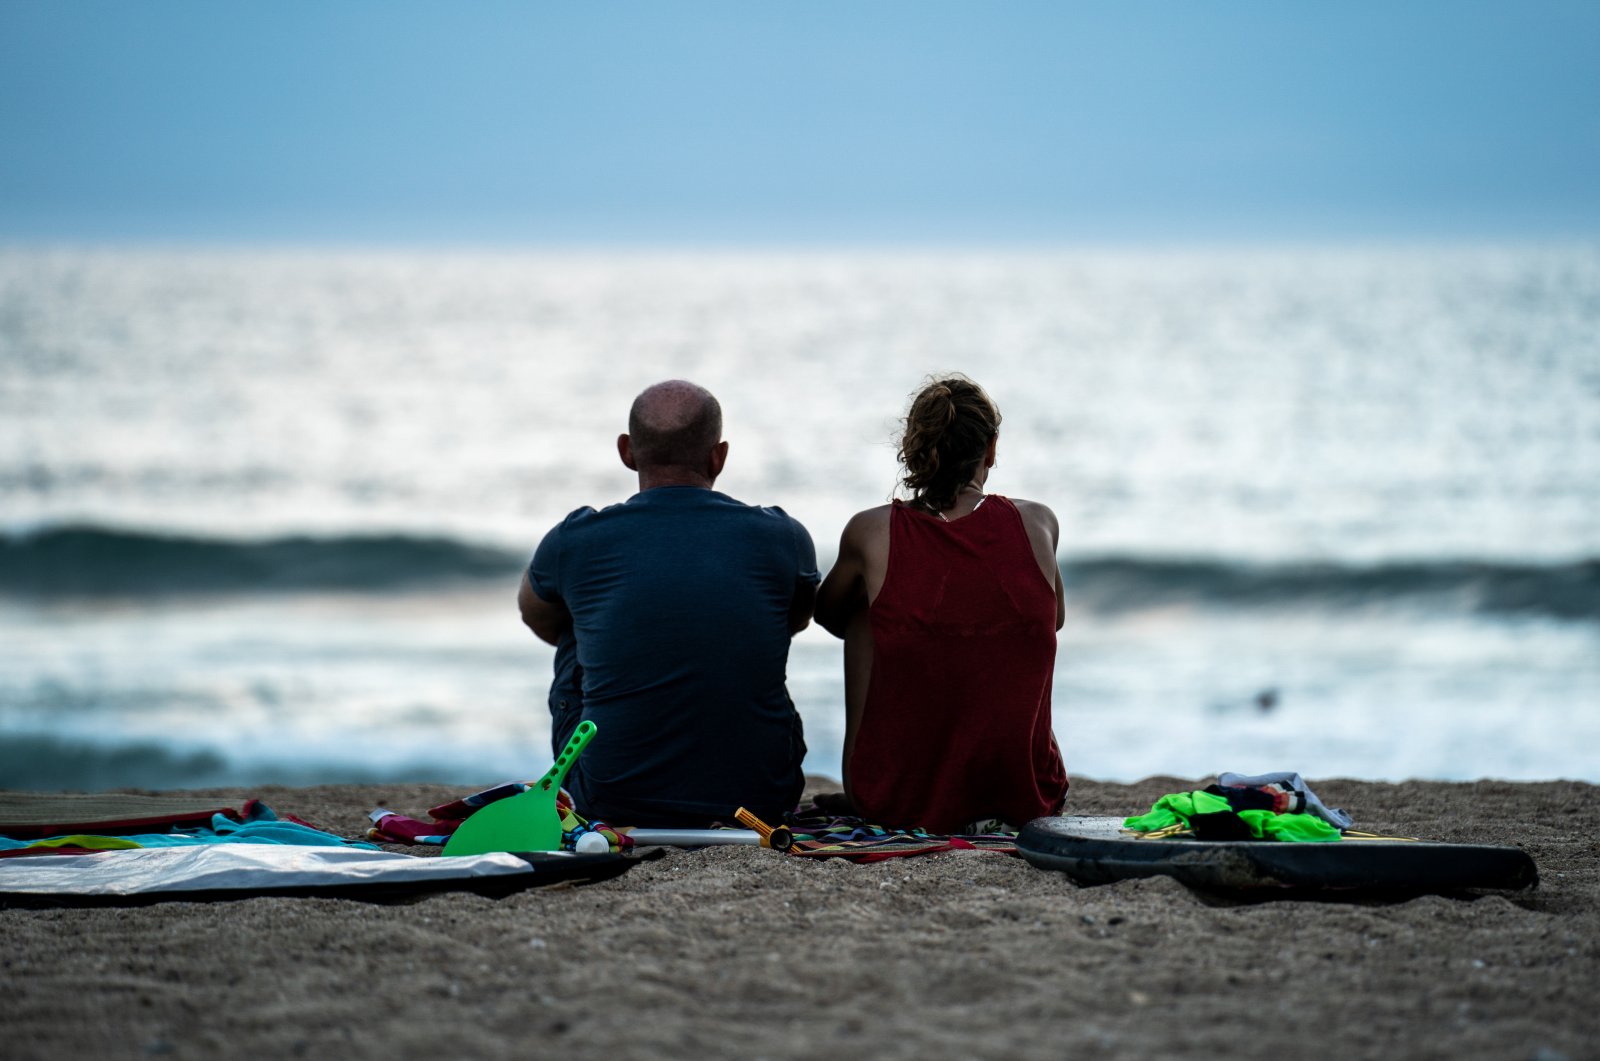 A man and a woman look at the sea surrounded by their children's beach stuff at the Savane beach, Capbreton, France, Aug. 20, 2020. (Reuters Photo)